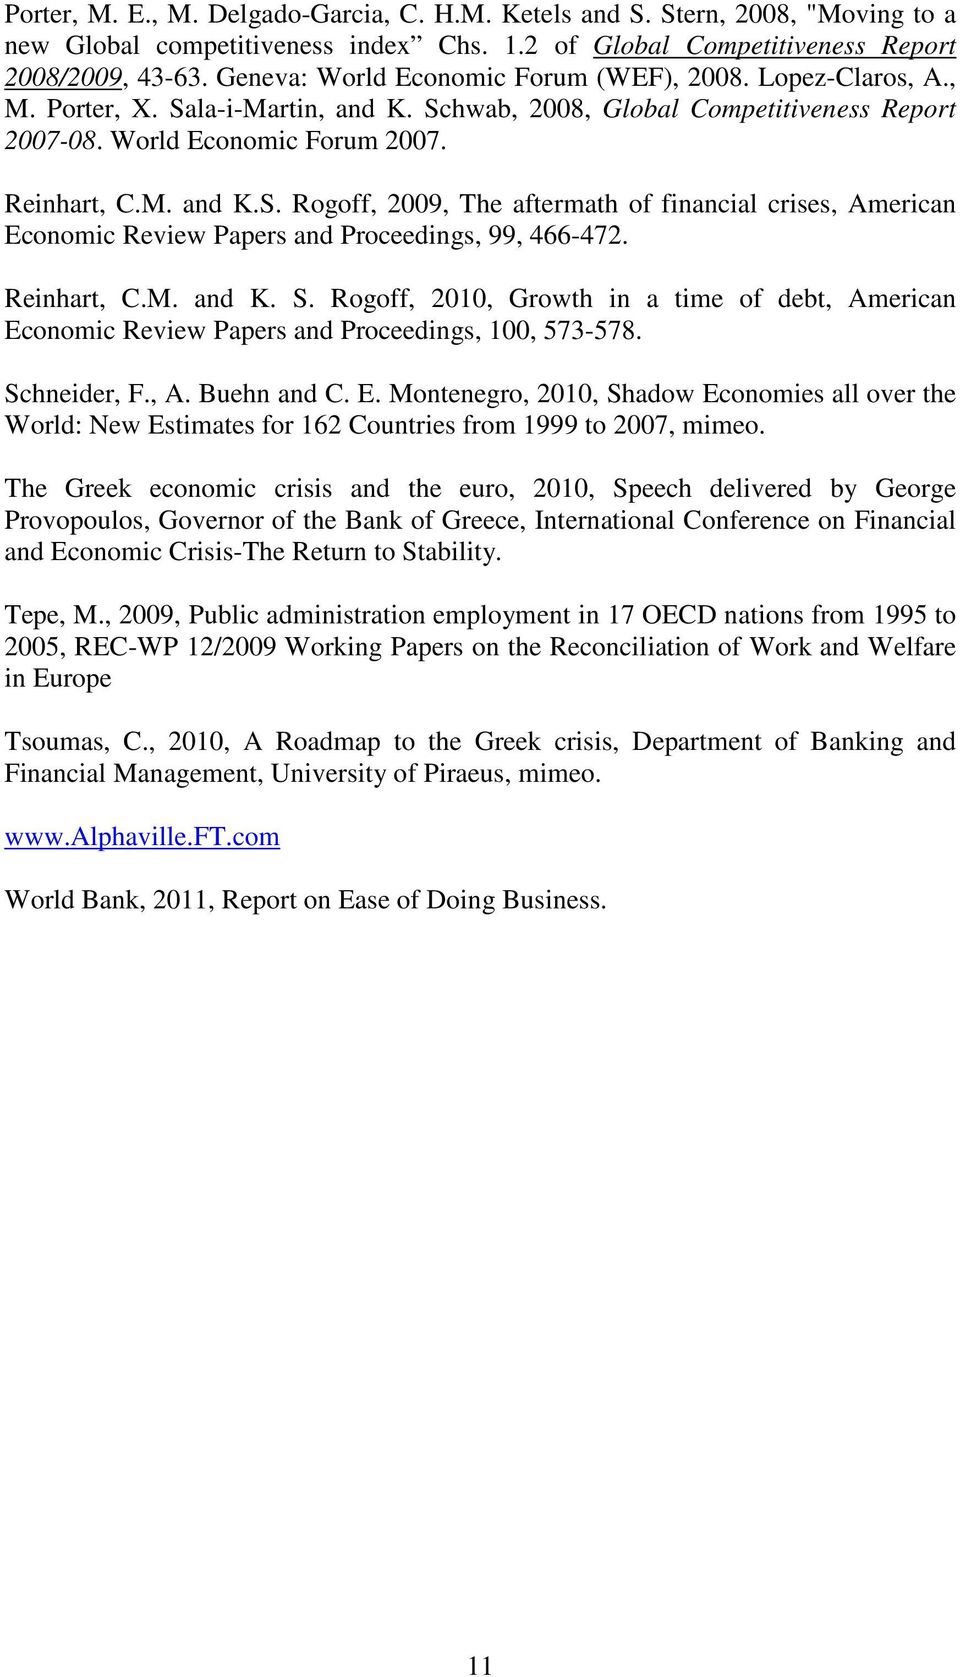 Reinhart, C.M. and K. S. Rogoff, 2010, Growth in a time of debt, American Economic Review Papers and Proceedings, 100, 573-578. Schneider, F., A. Buehn and C. E. Montenegro, 2010, Shadow Economies all over the World: New Estimates for 162 Countries from 1999 to 2007, mimeo.